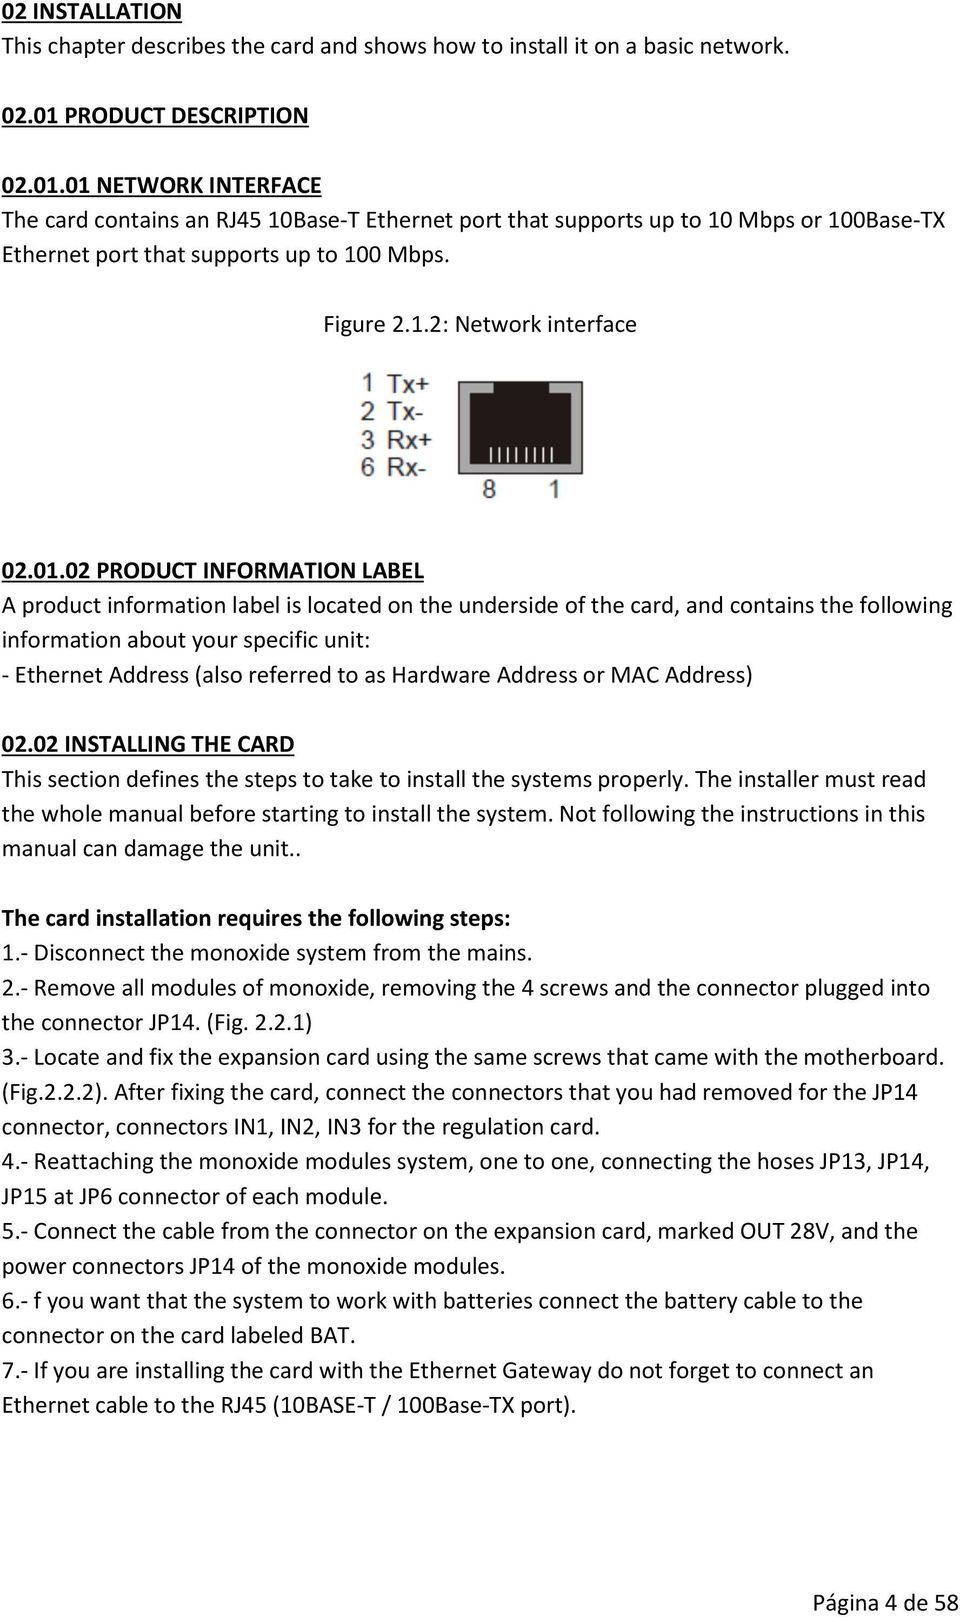 01.02 PRODUCT INFORMATION LABEL A product information label is located on the underside of the card, and contains the following information about your specific unit: - Ethernet Address (also referred